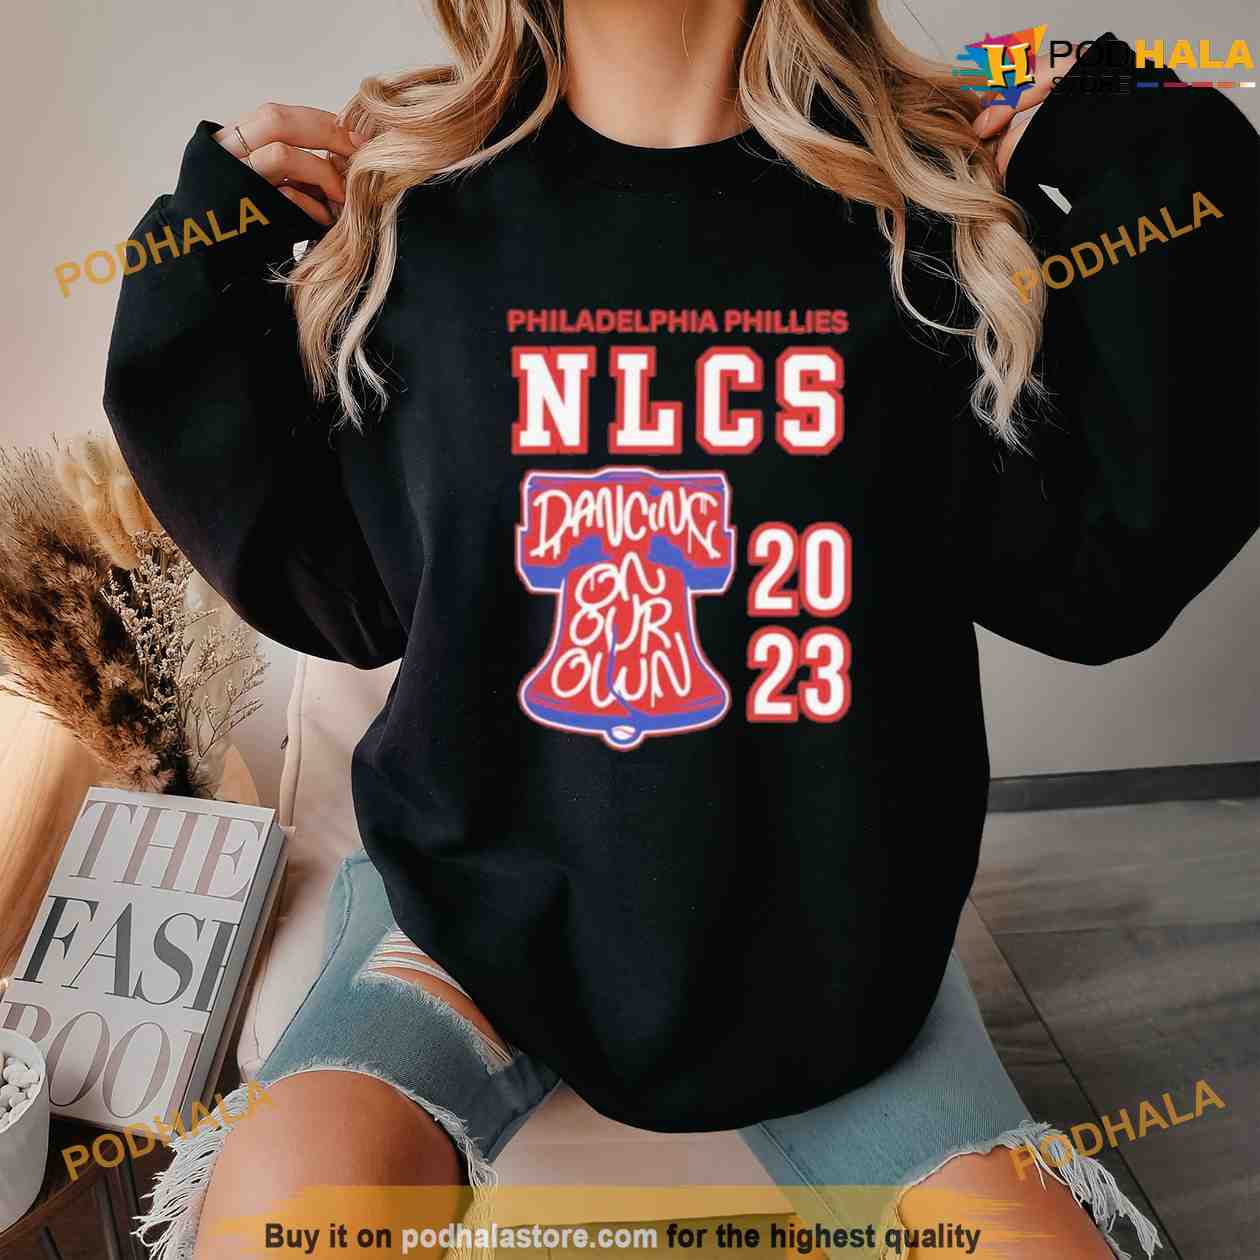 Official Red October 2023 Nlcs Philadelphia Phillies Shirt, hoodie,  sweater, long sleeve and tank top